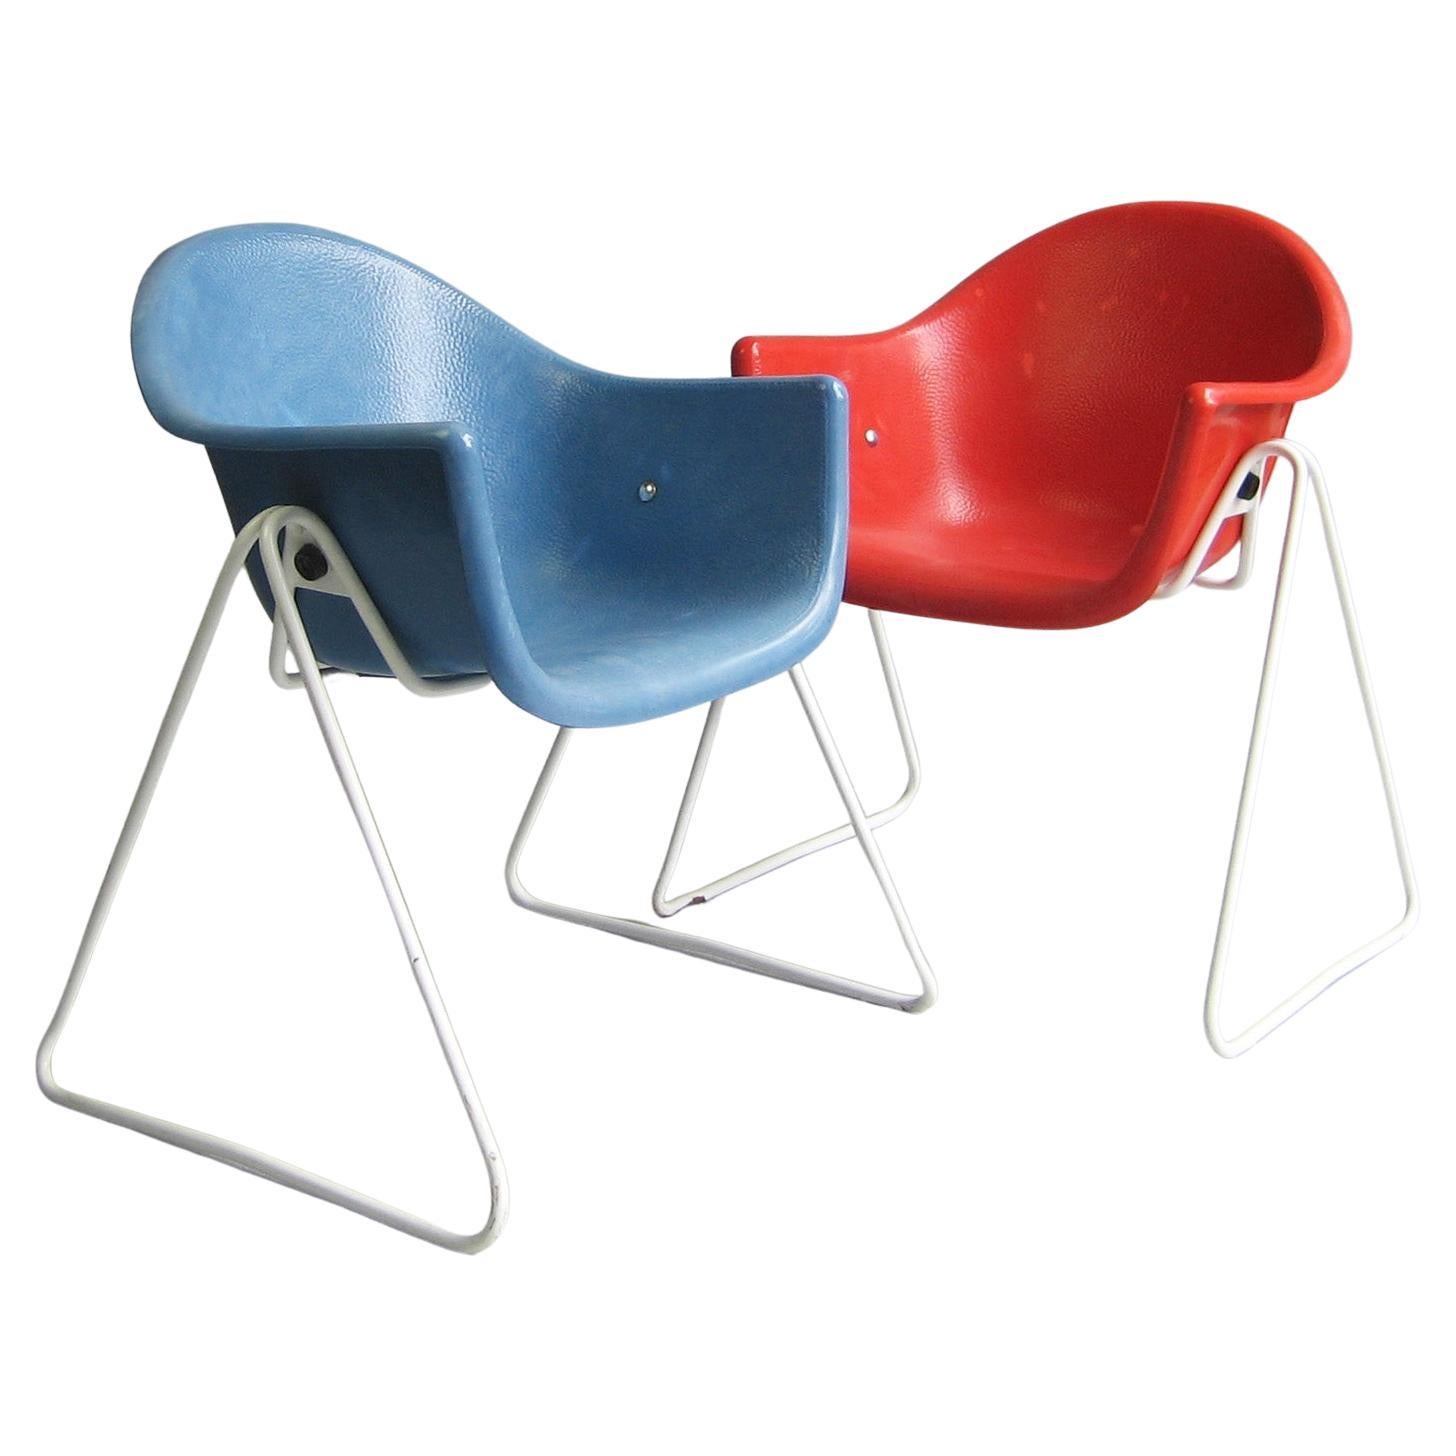 Pair of Walter Papst kids chairs, Wilkhahn, Germany 1961 - 1968 For Sale